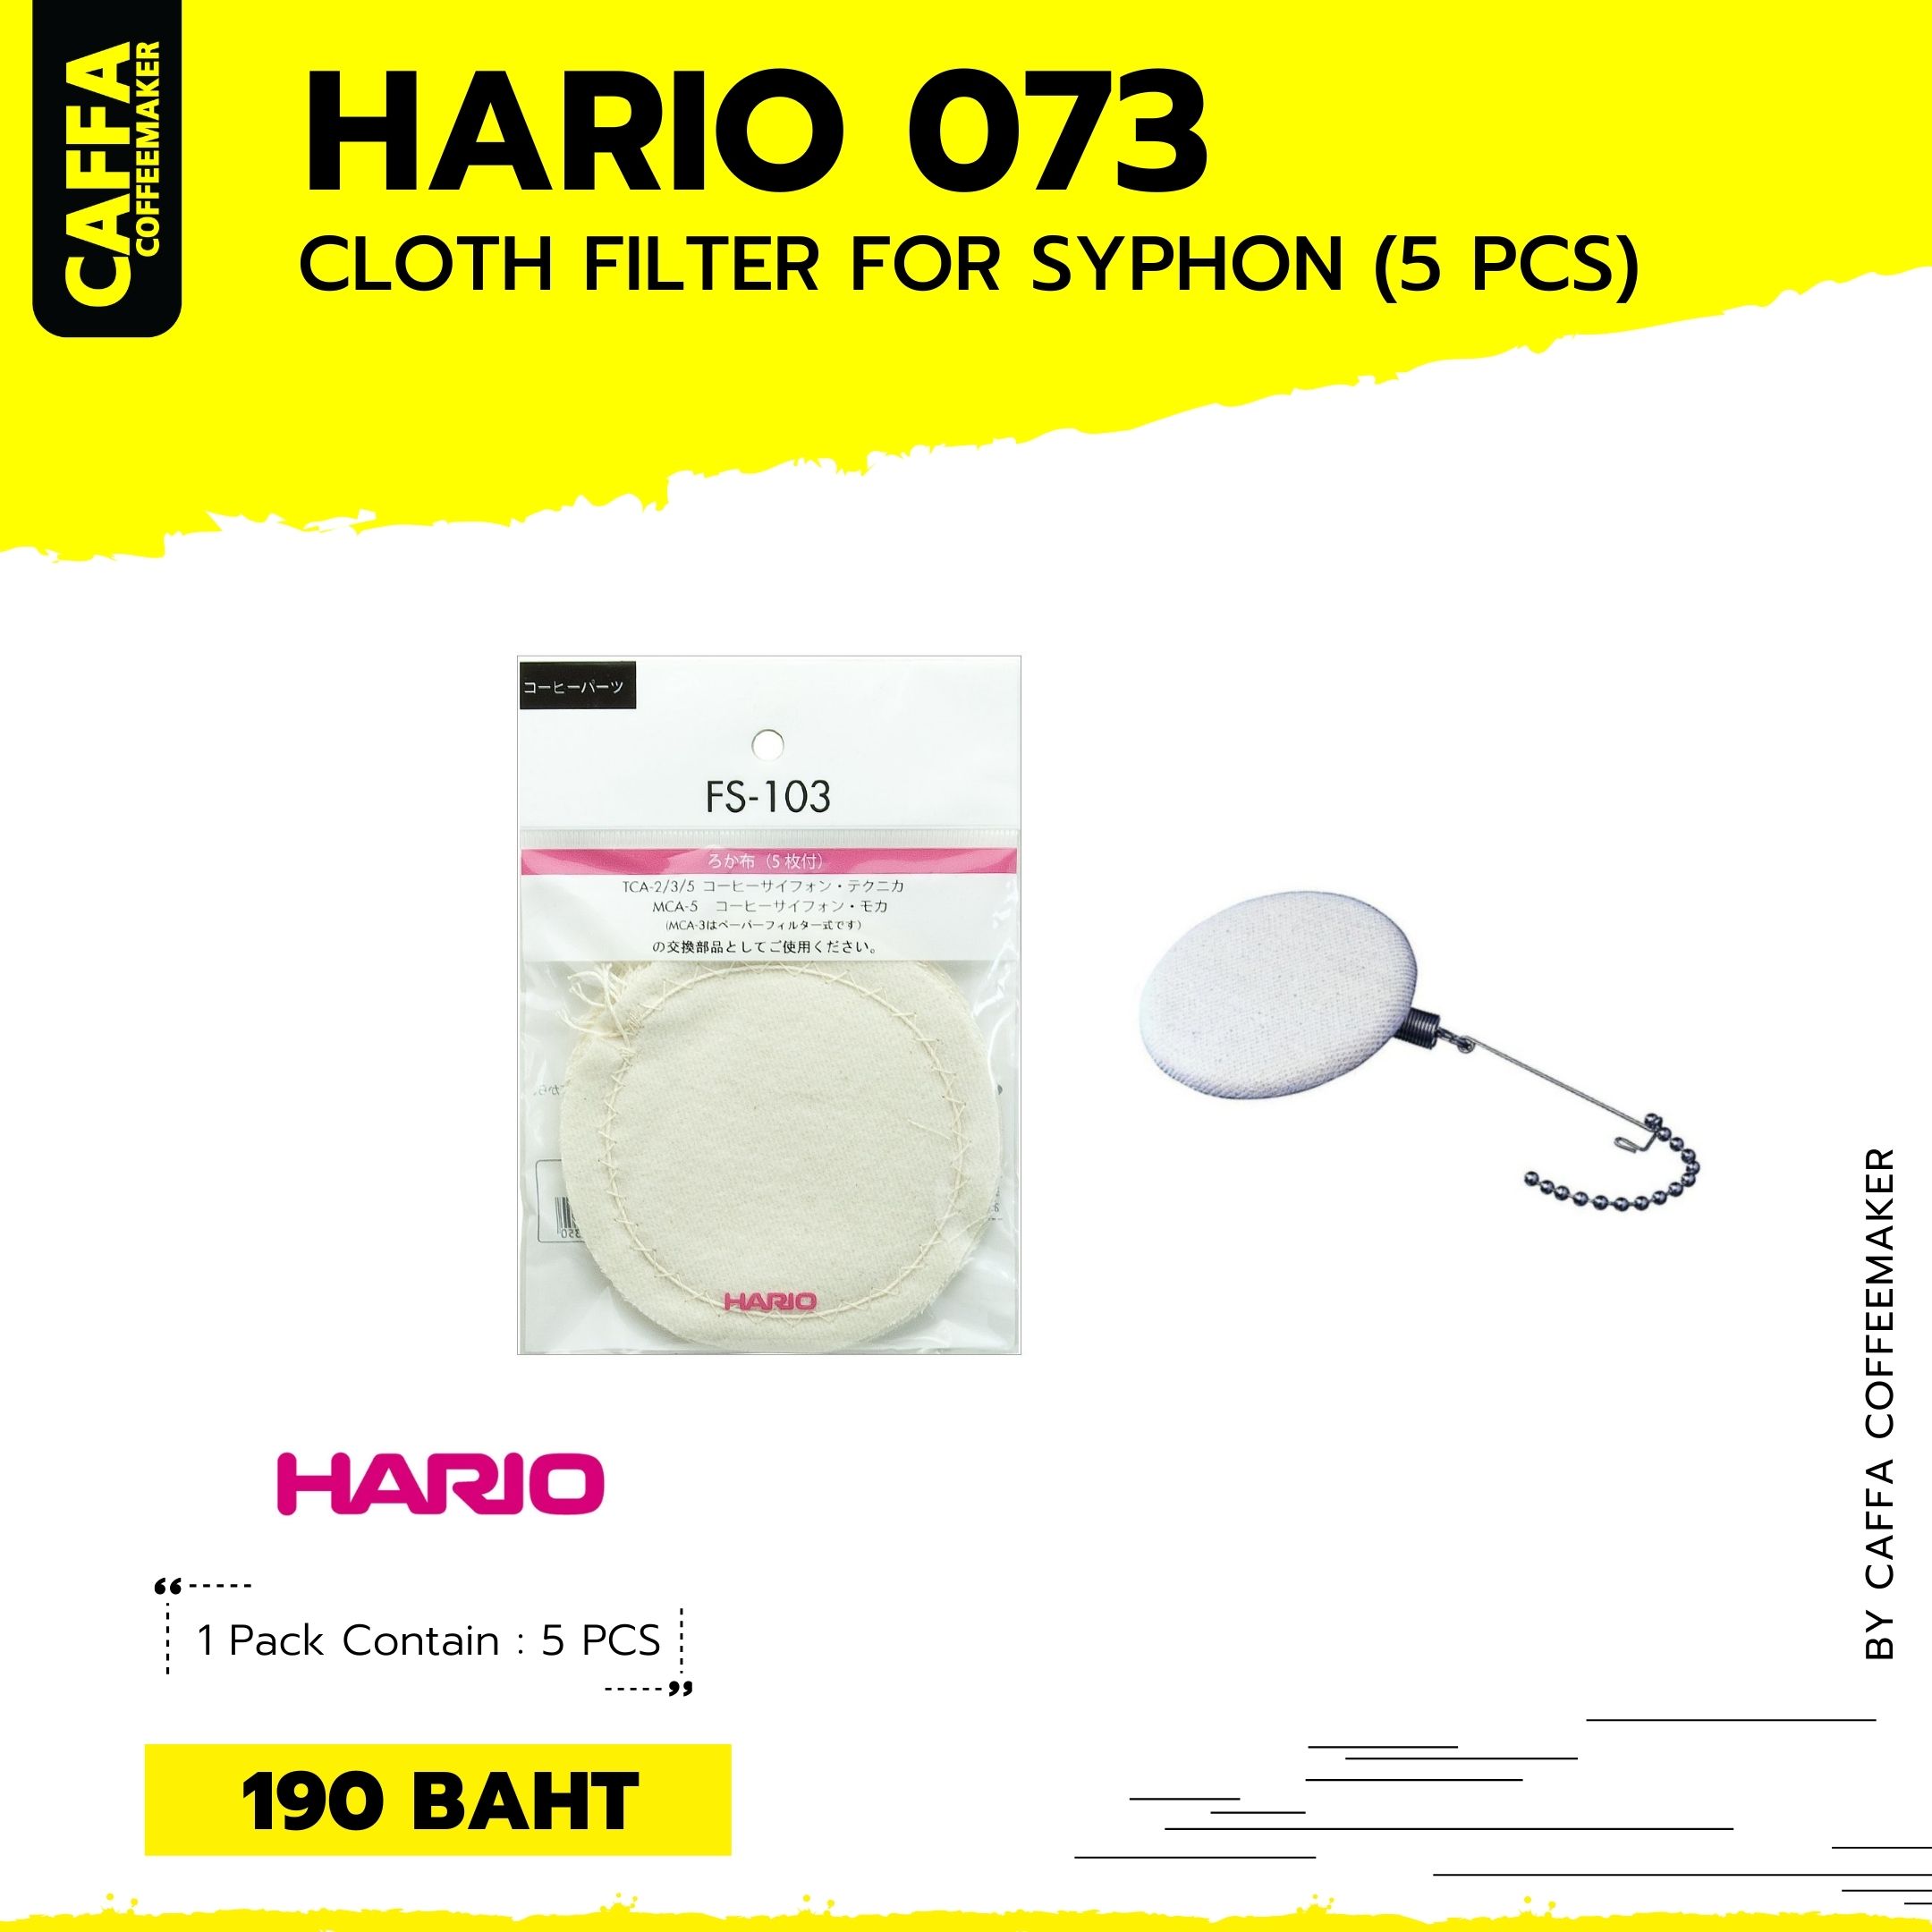 HARIO 073 CLOTH FILTER FOR SYPHON (5 PCS)